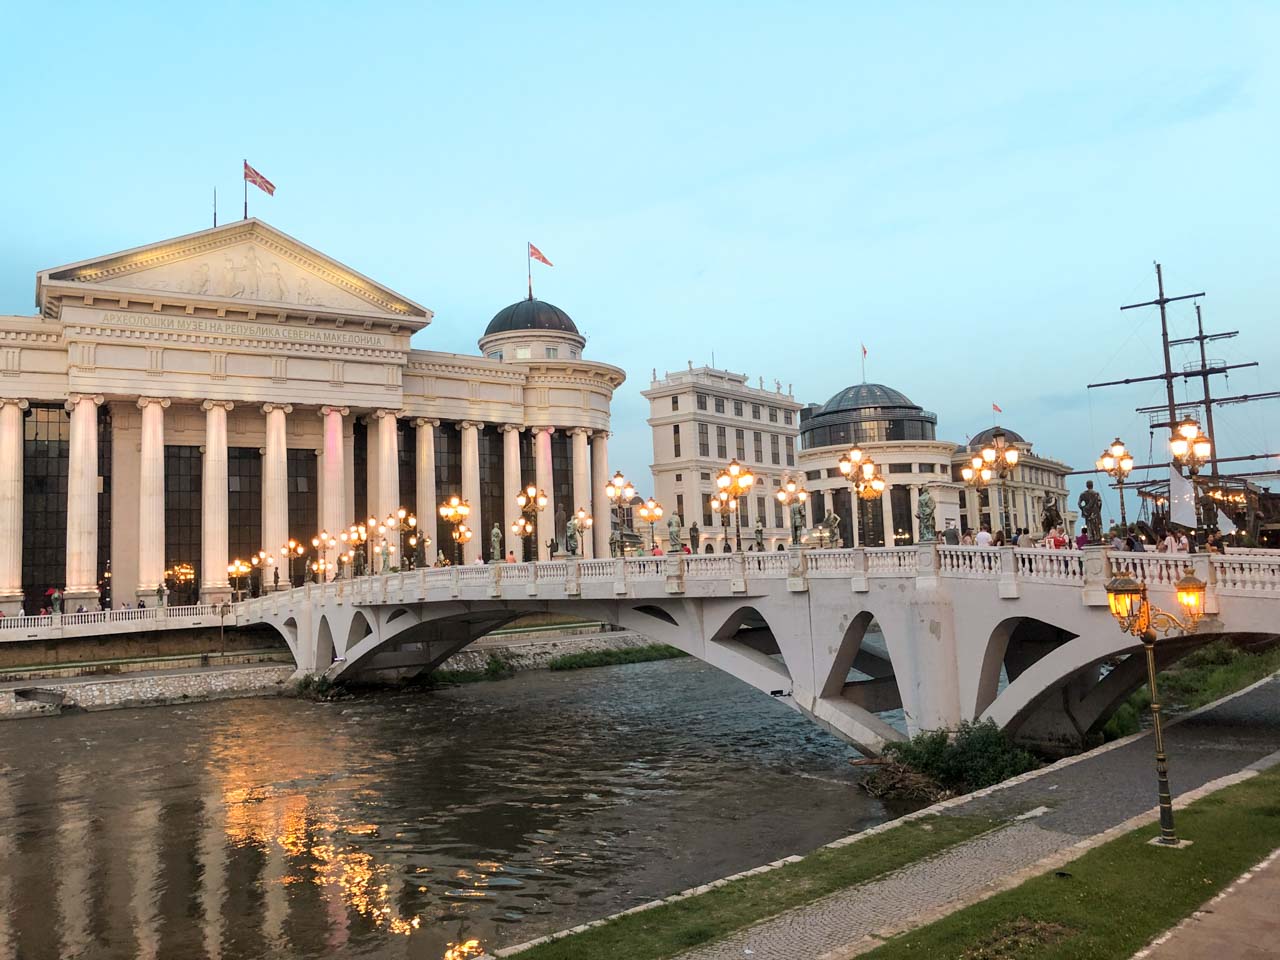 The Bridge of Civilisations in Macedonia (The Eye Bridge) leading to the Archaeological Museum of the Republic of Macedonia in Skopje